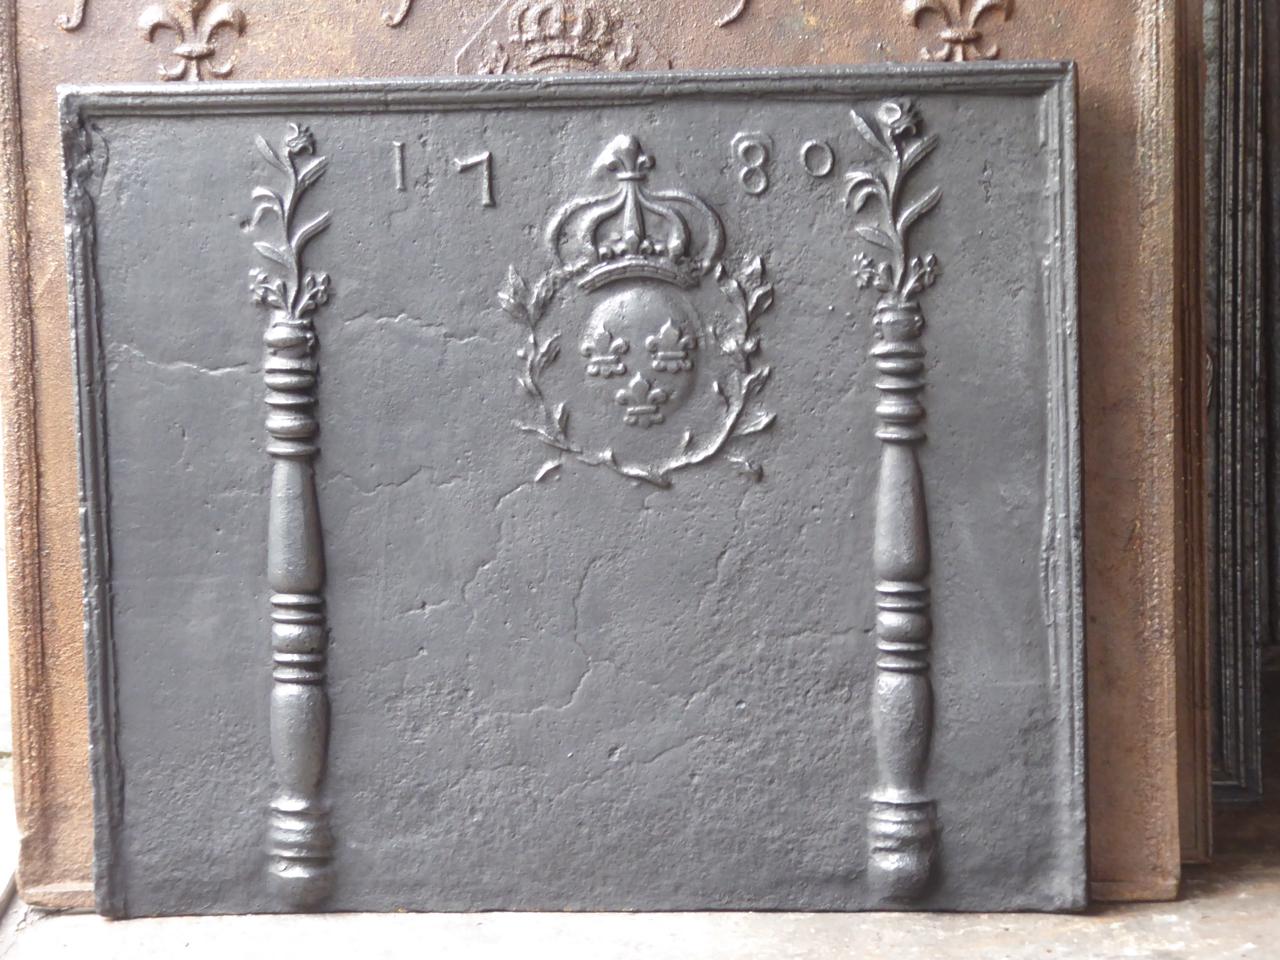 18th century French Louis XV fireback with two pillars of Hercules decorated with flower pots and the arms of France. The date of production, 1780, is also cast in the fireback. This is the coat of arms of the House of Bourbon, an originally French